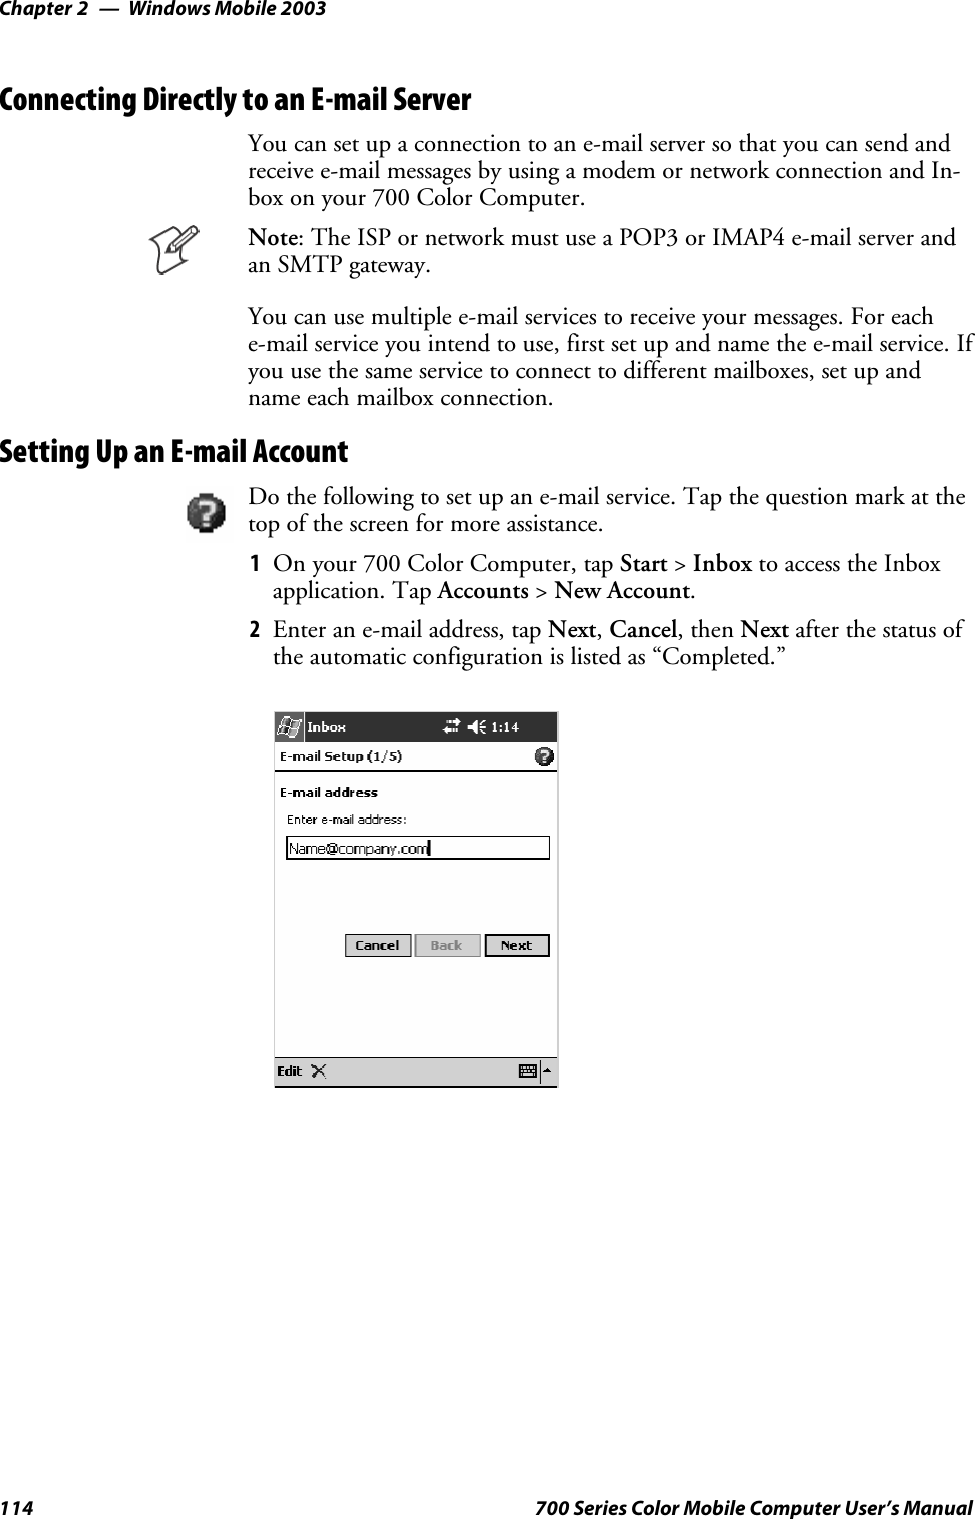 Windows Mobile 2003Chapter —2114 700 Series Color Mobile Computer User’s ManualConnecting Directly to an E-mail ServerYou can set up a connection to an e-mail server so that you can send andreceive e-mail messages by using a modem or network connection and In-box on your 700 Color Computer.Note: The ISP or network must use a POP3 or IMAP4 e-mail server andan SMTP gateway.You can use multiple e-mail services to receive your messages. For eache-mail service you intend to use, first set up and name the e-mail service. Ifyou use the same service to connect to different mailboxes, set up andname each mailbox connection.Setting Up an E-mail AccountDo the following to set up an e-mail service. Tap the question mark at thetop of the screen for more assistance.1On your 700 Color Computer, tap Start &gt;Inbox to access the Inboxapplication. Tap Accounts &gt;New Account.2Enter an e-mail address, tap Next,Cancel,thenNext after the status ofthe automatic configuration is listed as “Completed.”